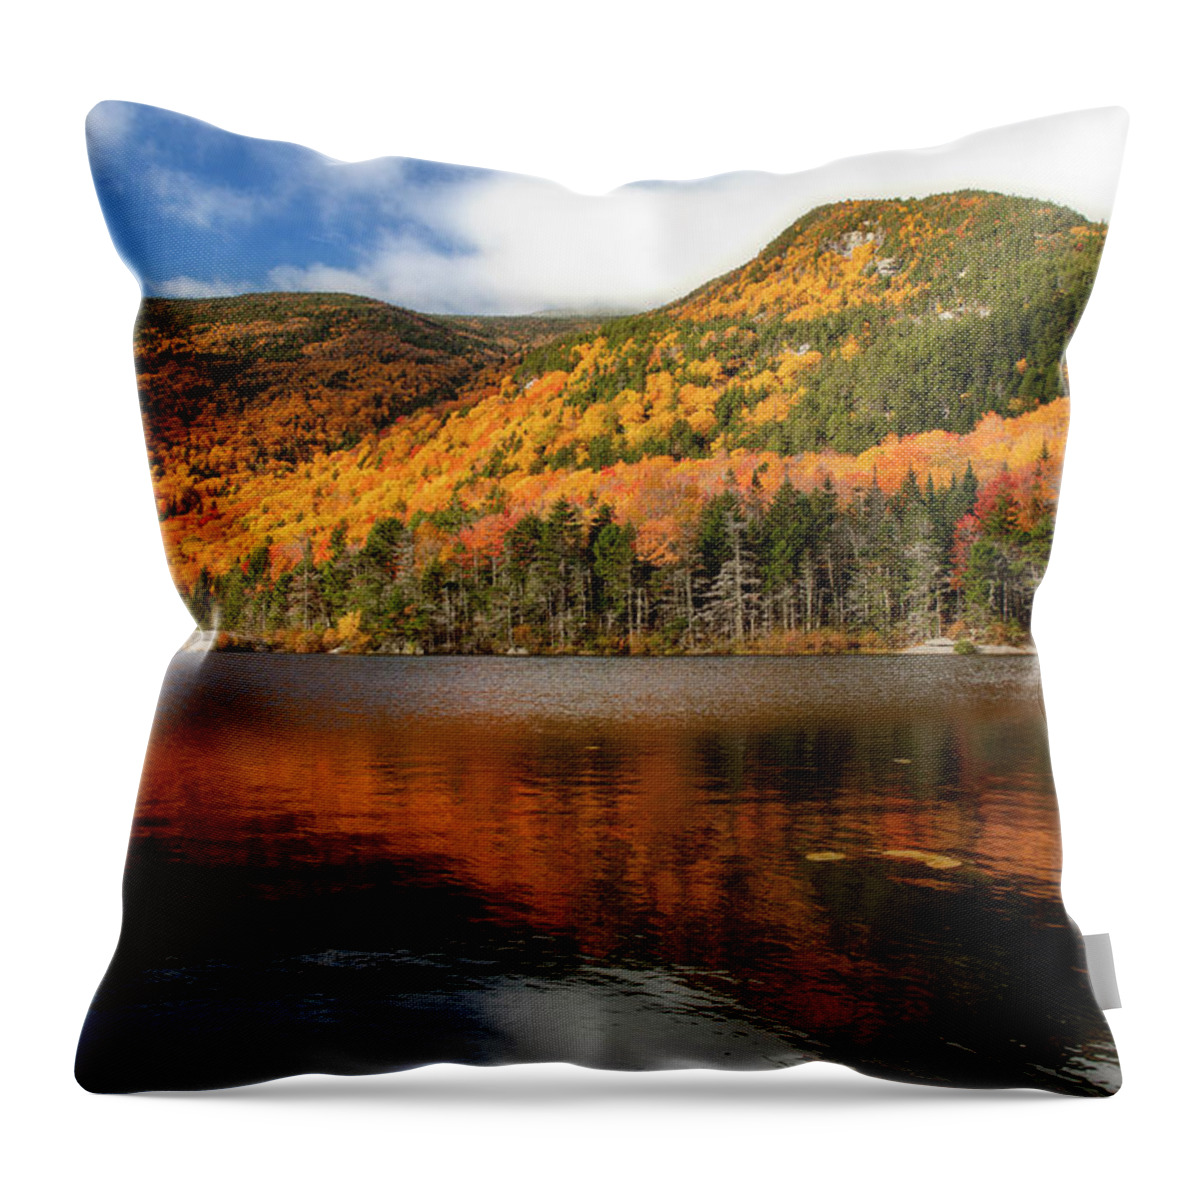 Beaver Pond New Hampshire In Fall Throw Pillow featuring the photograph Fall Reflections Beaver Pond by Dan Sproul